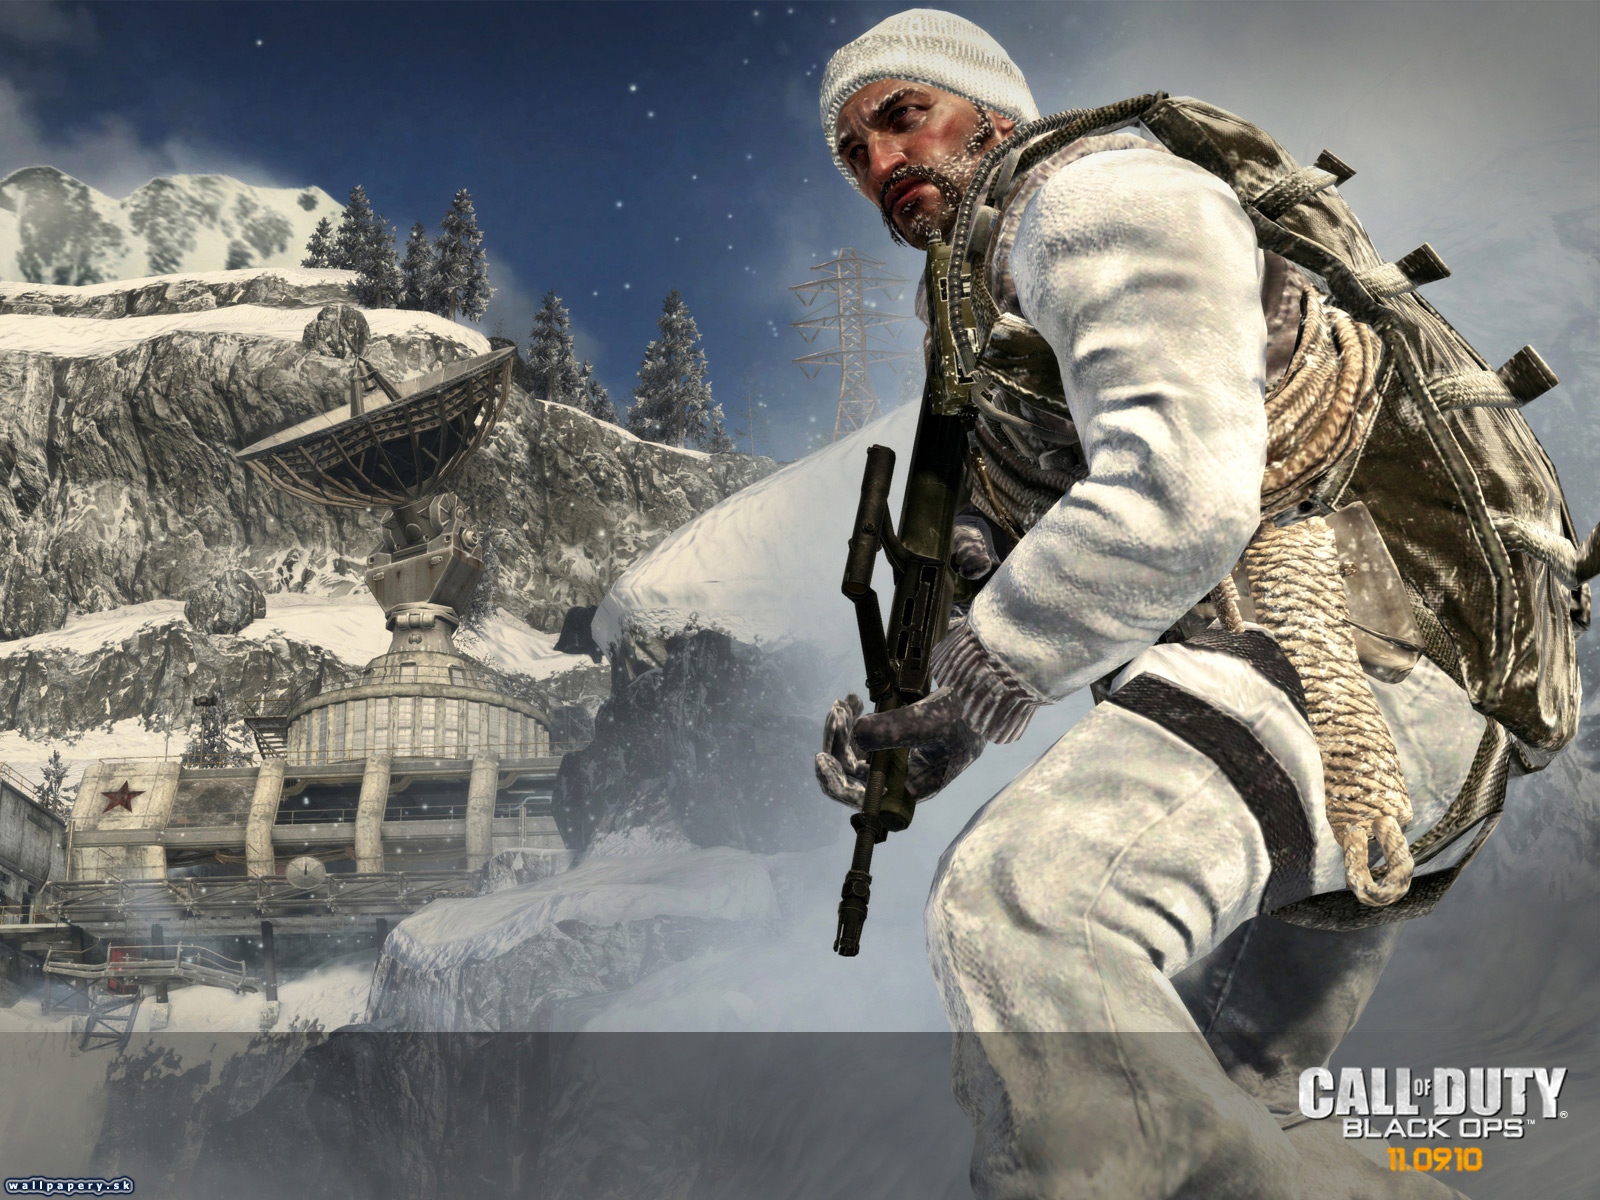 Call of Duty: Black Ops - wallpaper 2